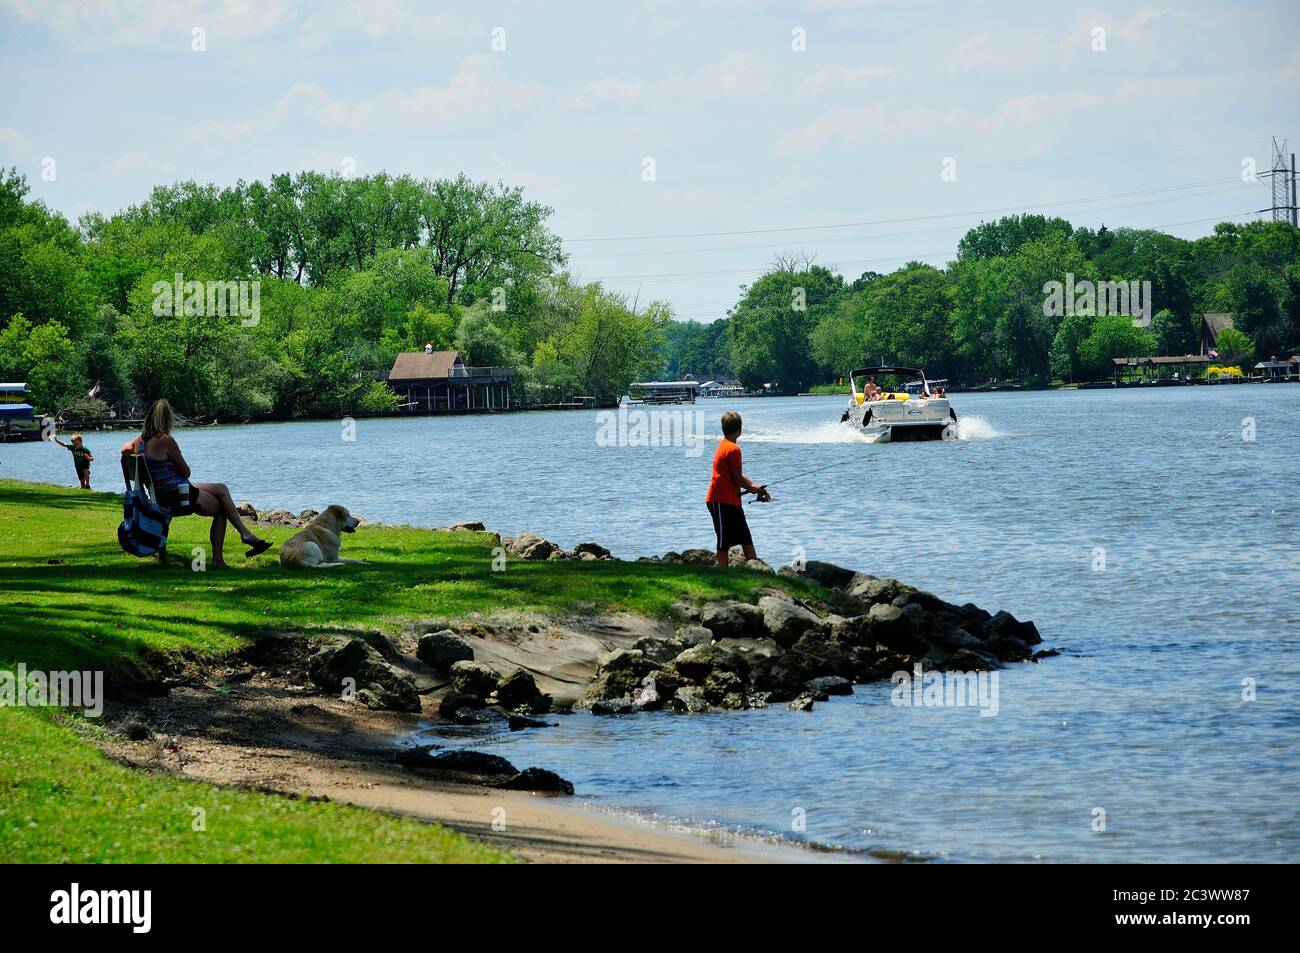 Young boy fishing from shoreline of Lions Park on the Fox River in Northern Illinois, USA. Stock Photo